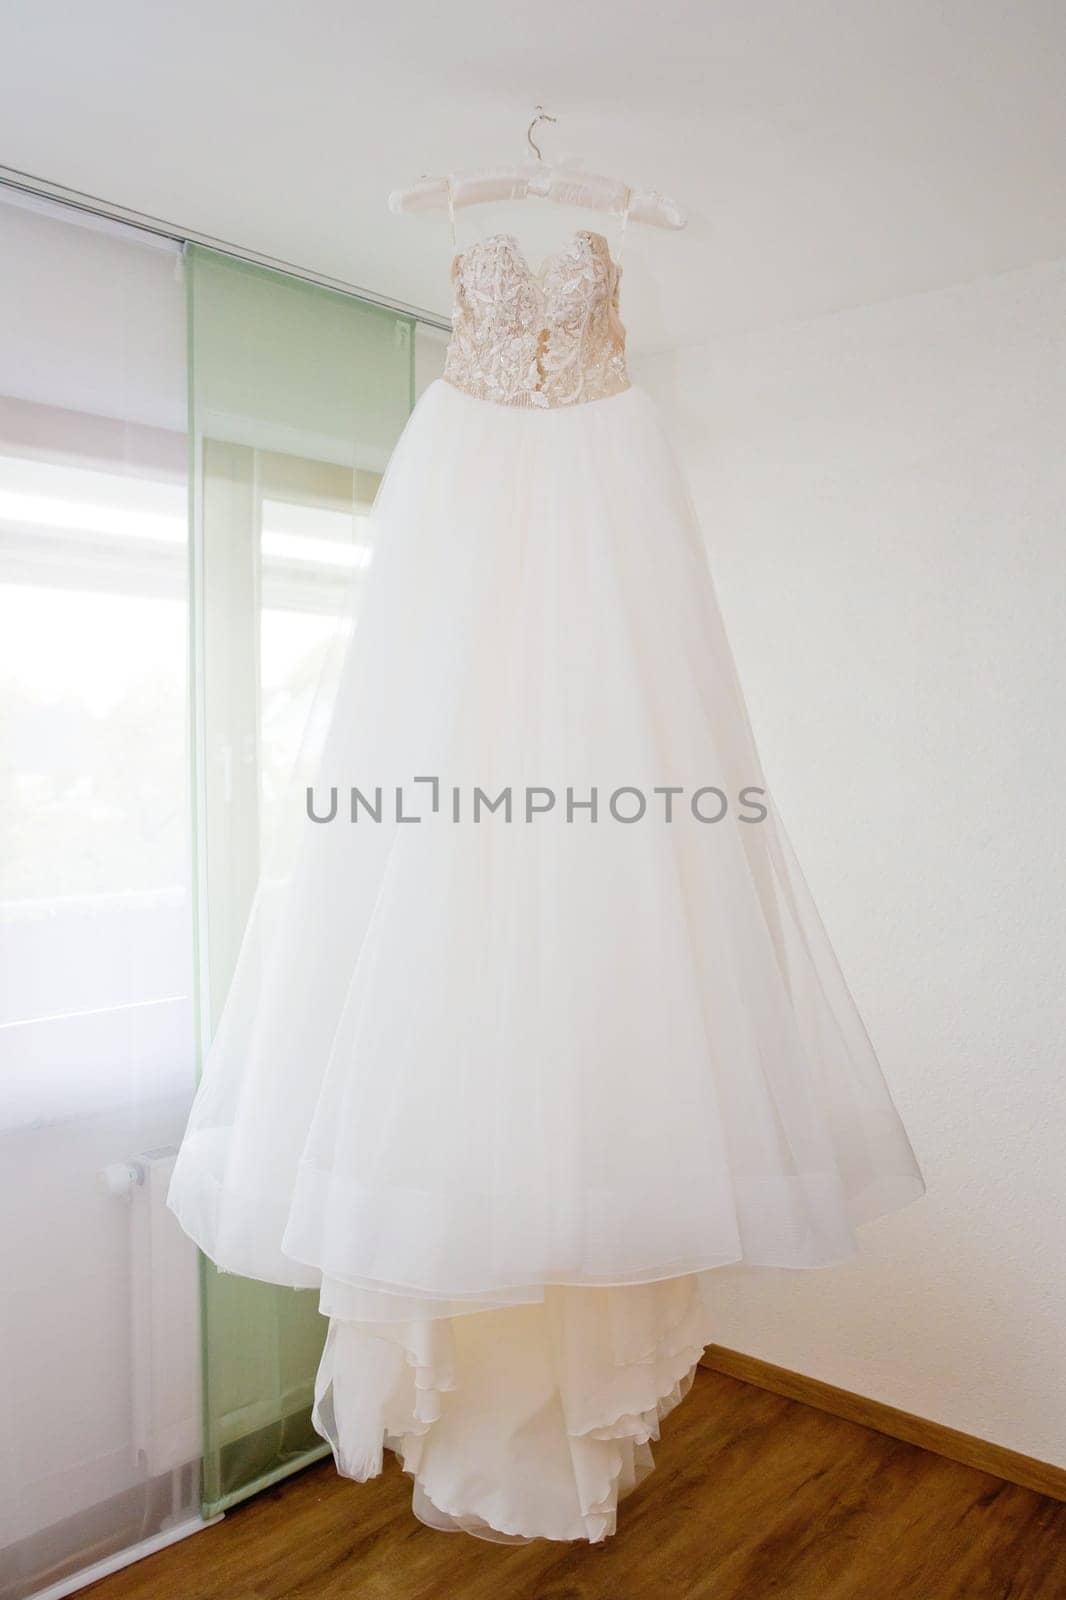 The delicate bride's dress is hanging in room. Selective focus. by leonik